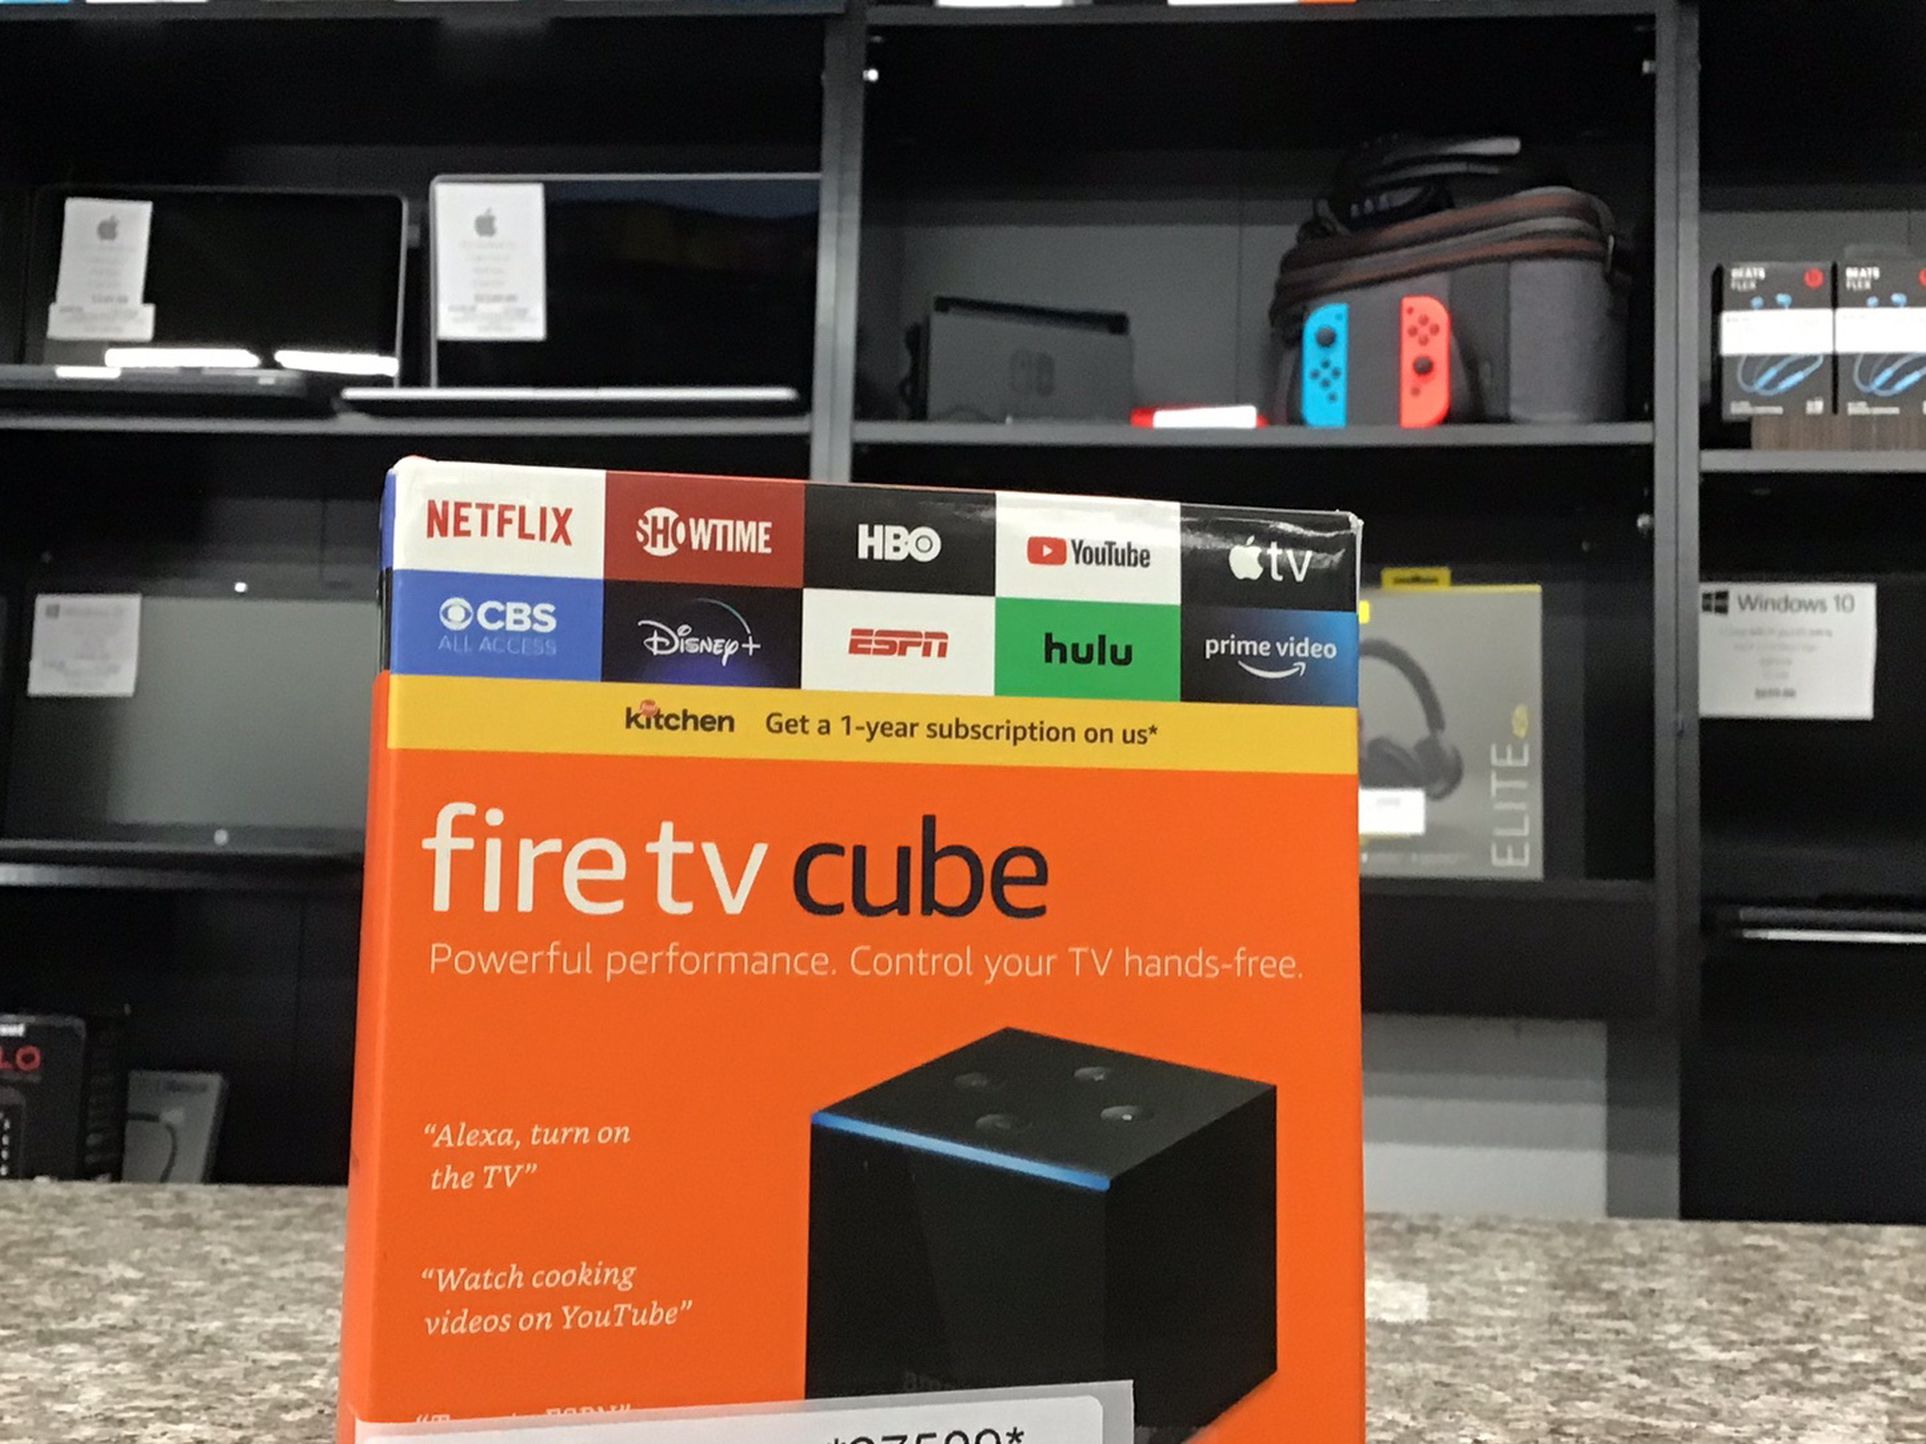 Fire TV Cube Hands-free streaming device with Alexa | 4K Ultra HD 